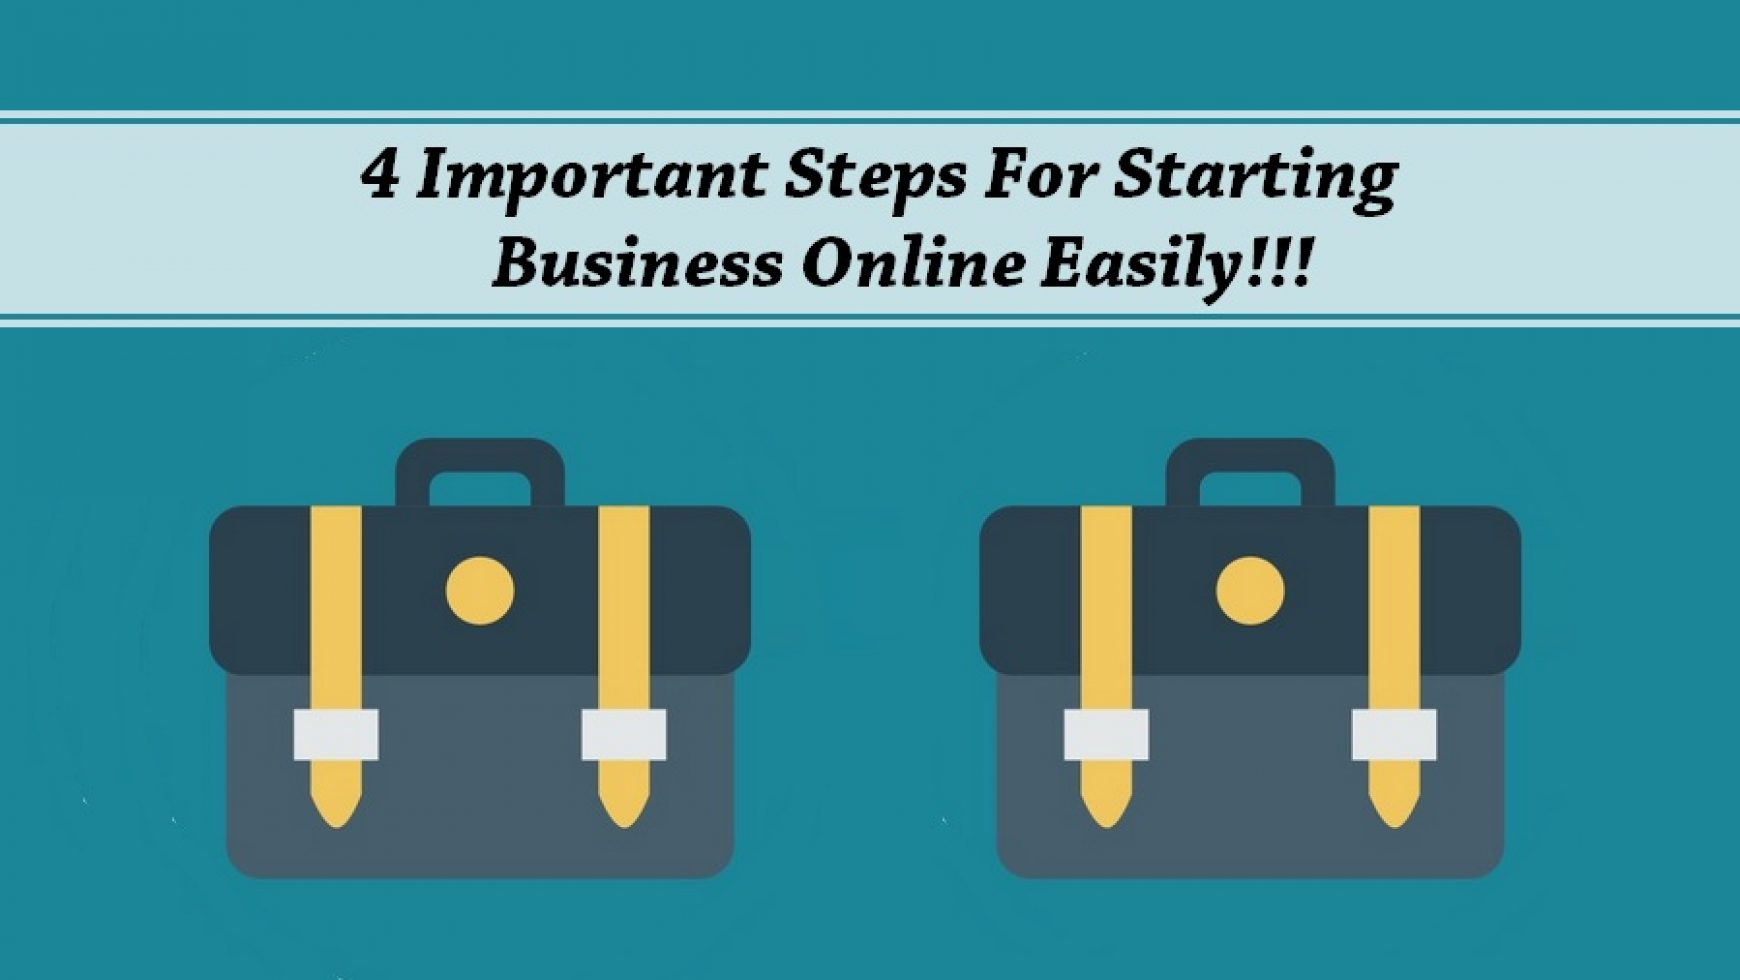 4 Important Steps For Starting Business Online Easily!!!